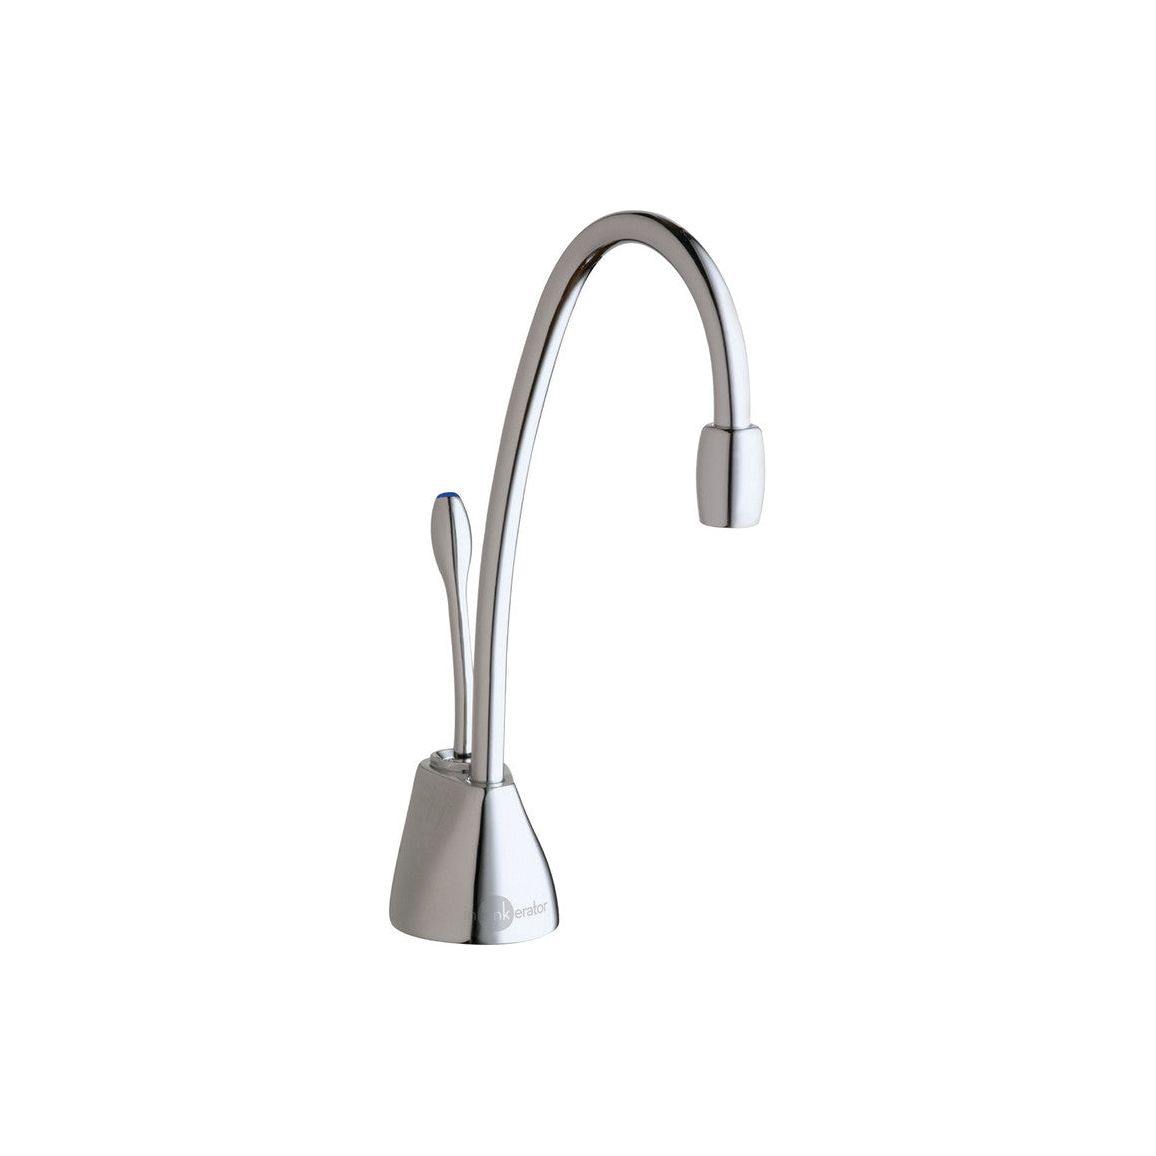 InSinkErator GN1100 Hot Water Tap, Neo Tank & Water Filter - Chrome